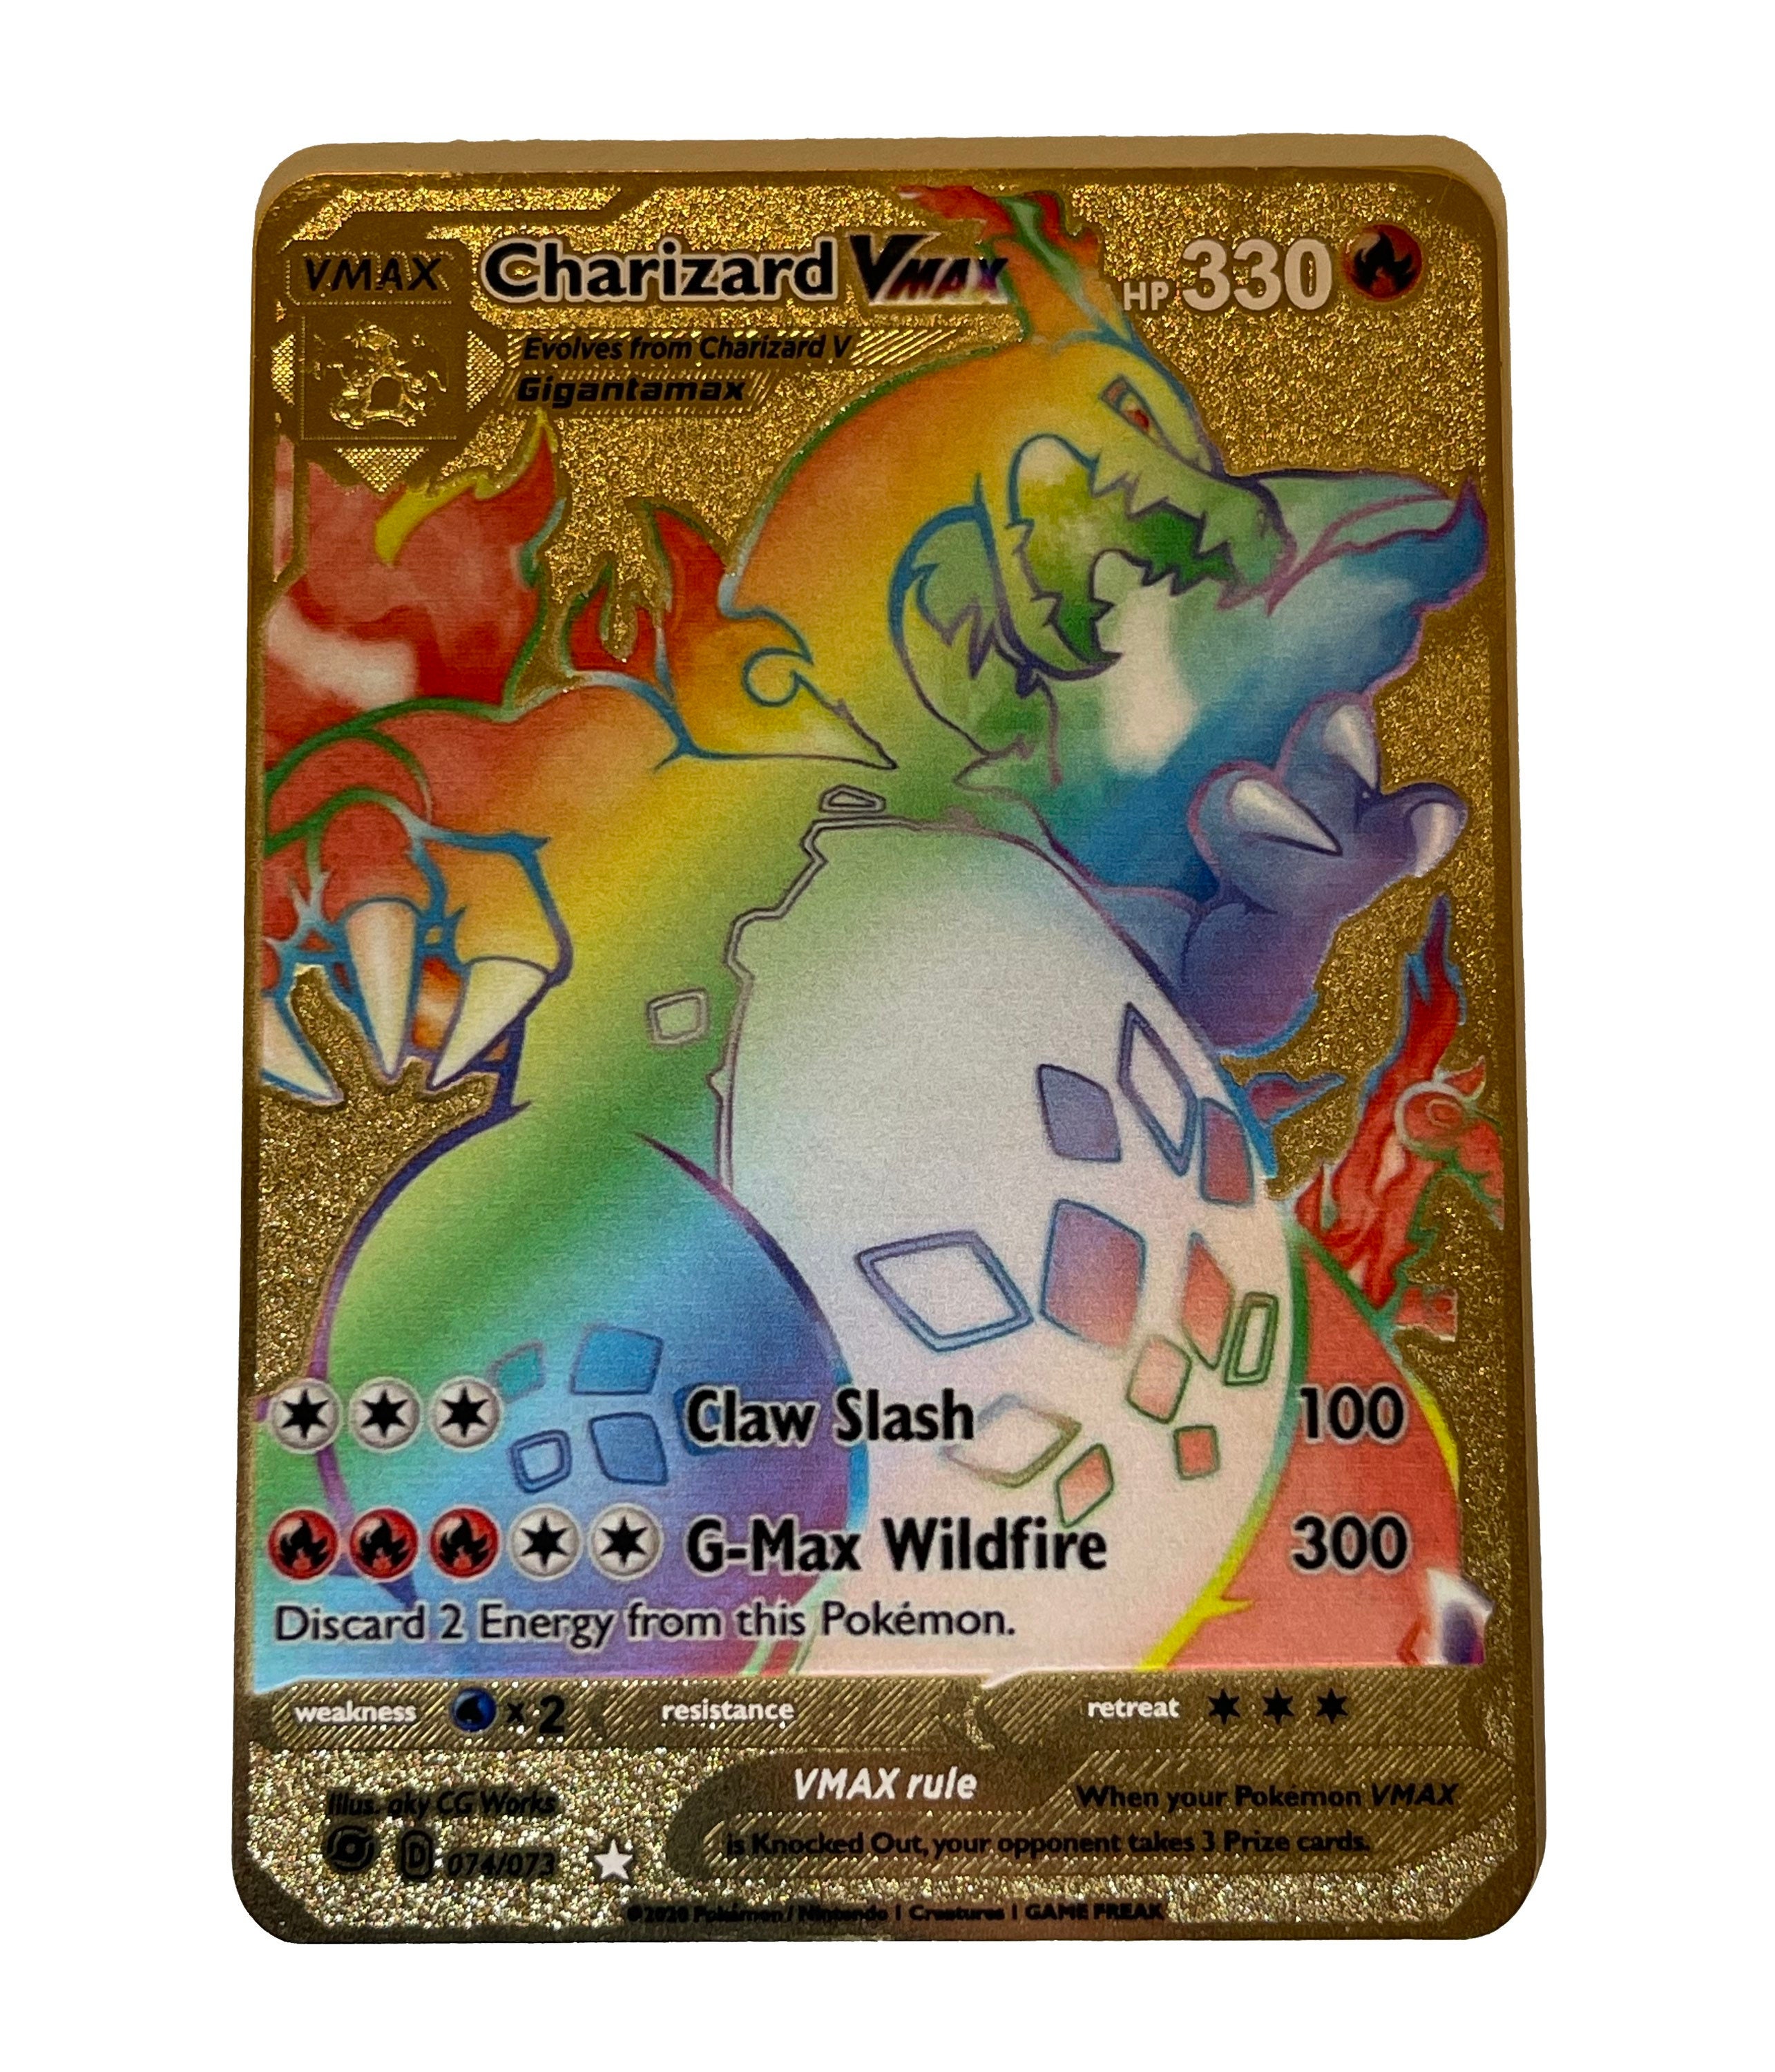 Game Fan and Collectors Charizard Metal Gold Plated Cards Vmax，Rare Rainbow Vmax Cards，Charizard Vmax/GX/DX Golden Collection Cards Best Gift for Kids and Adult 